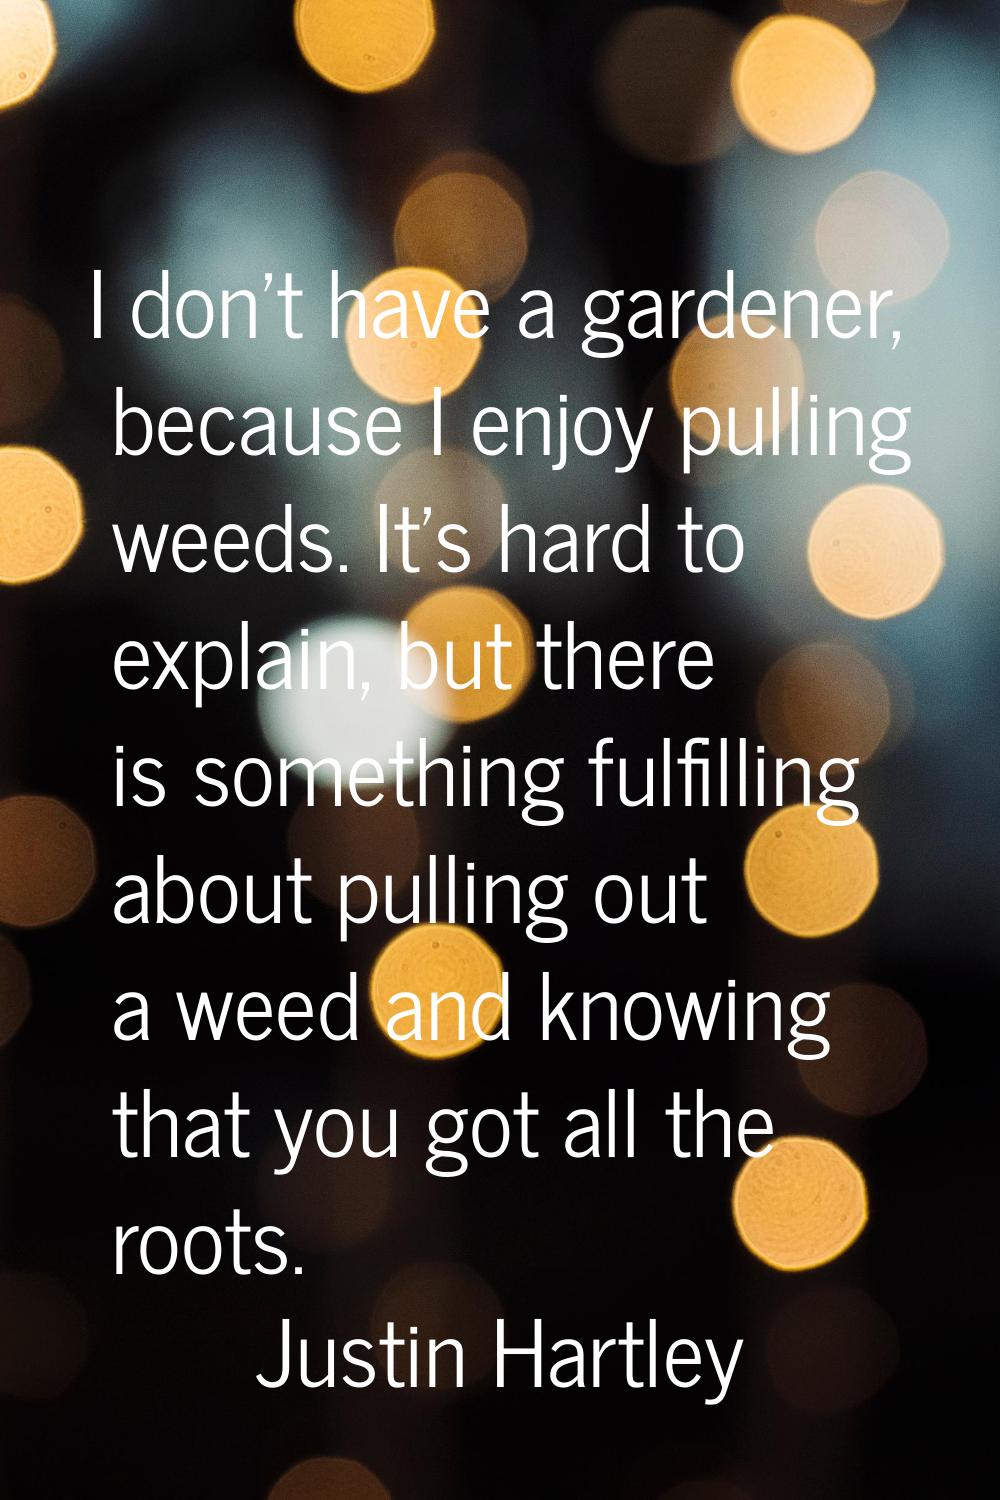 I don't have a gardener, because I enjoy pulling weeds. It's hard to explain, but there is somethin